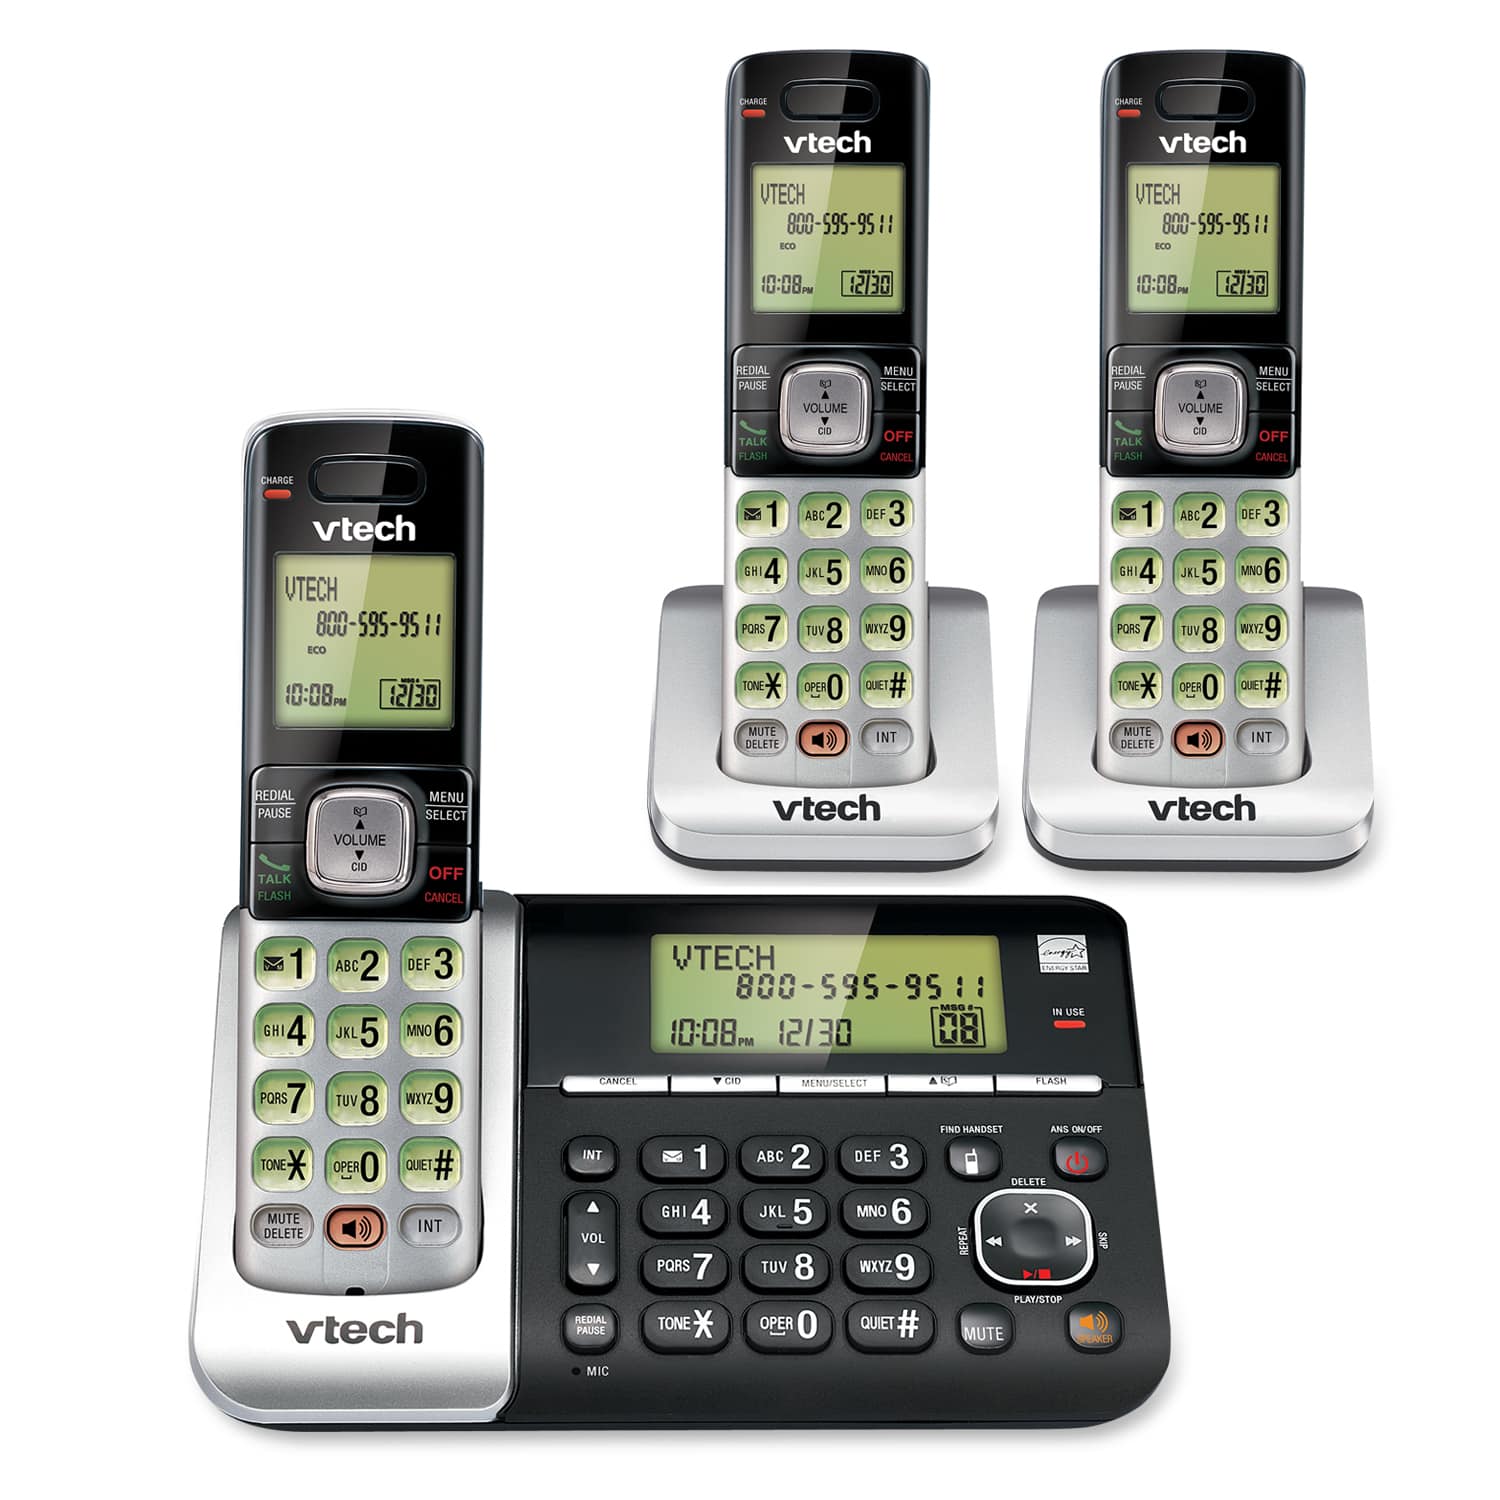 3 Handset Answering System with Dual Caller ID/Call Waiting - view 1